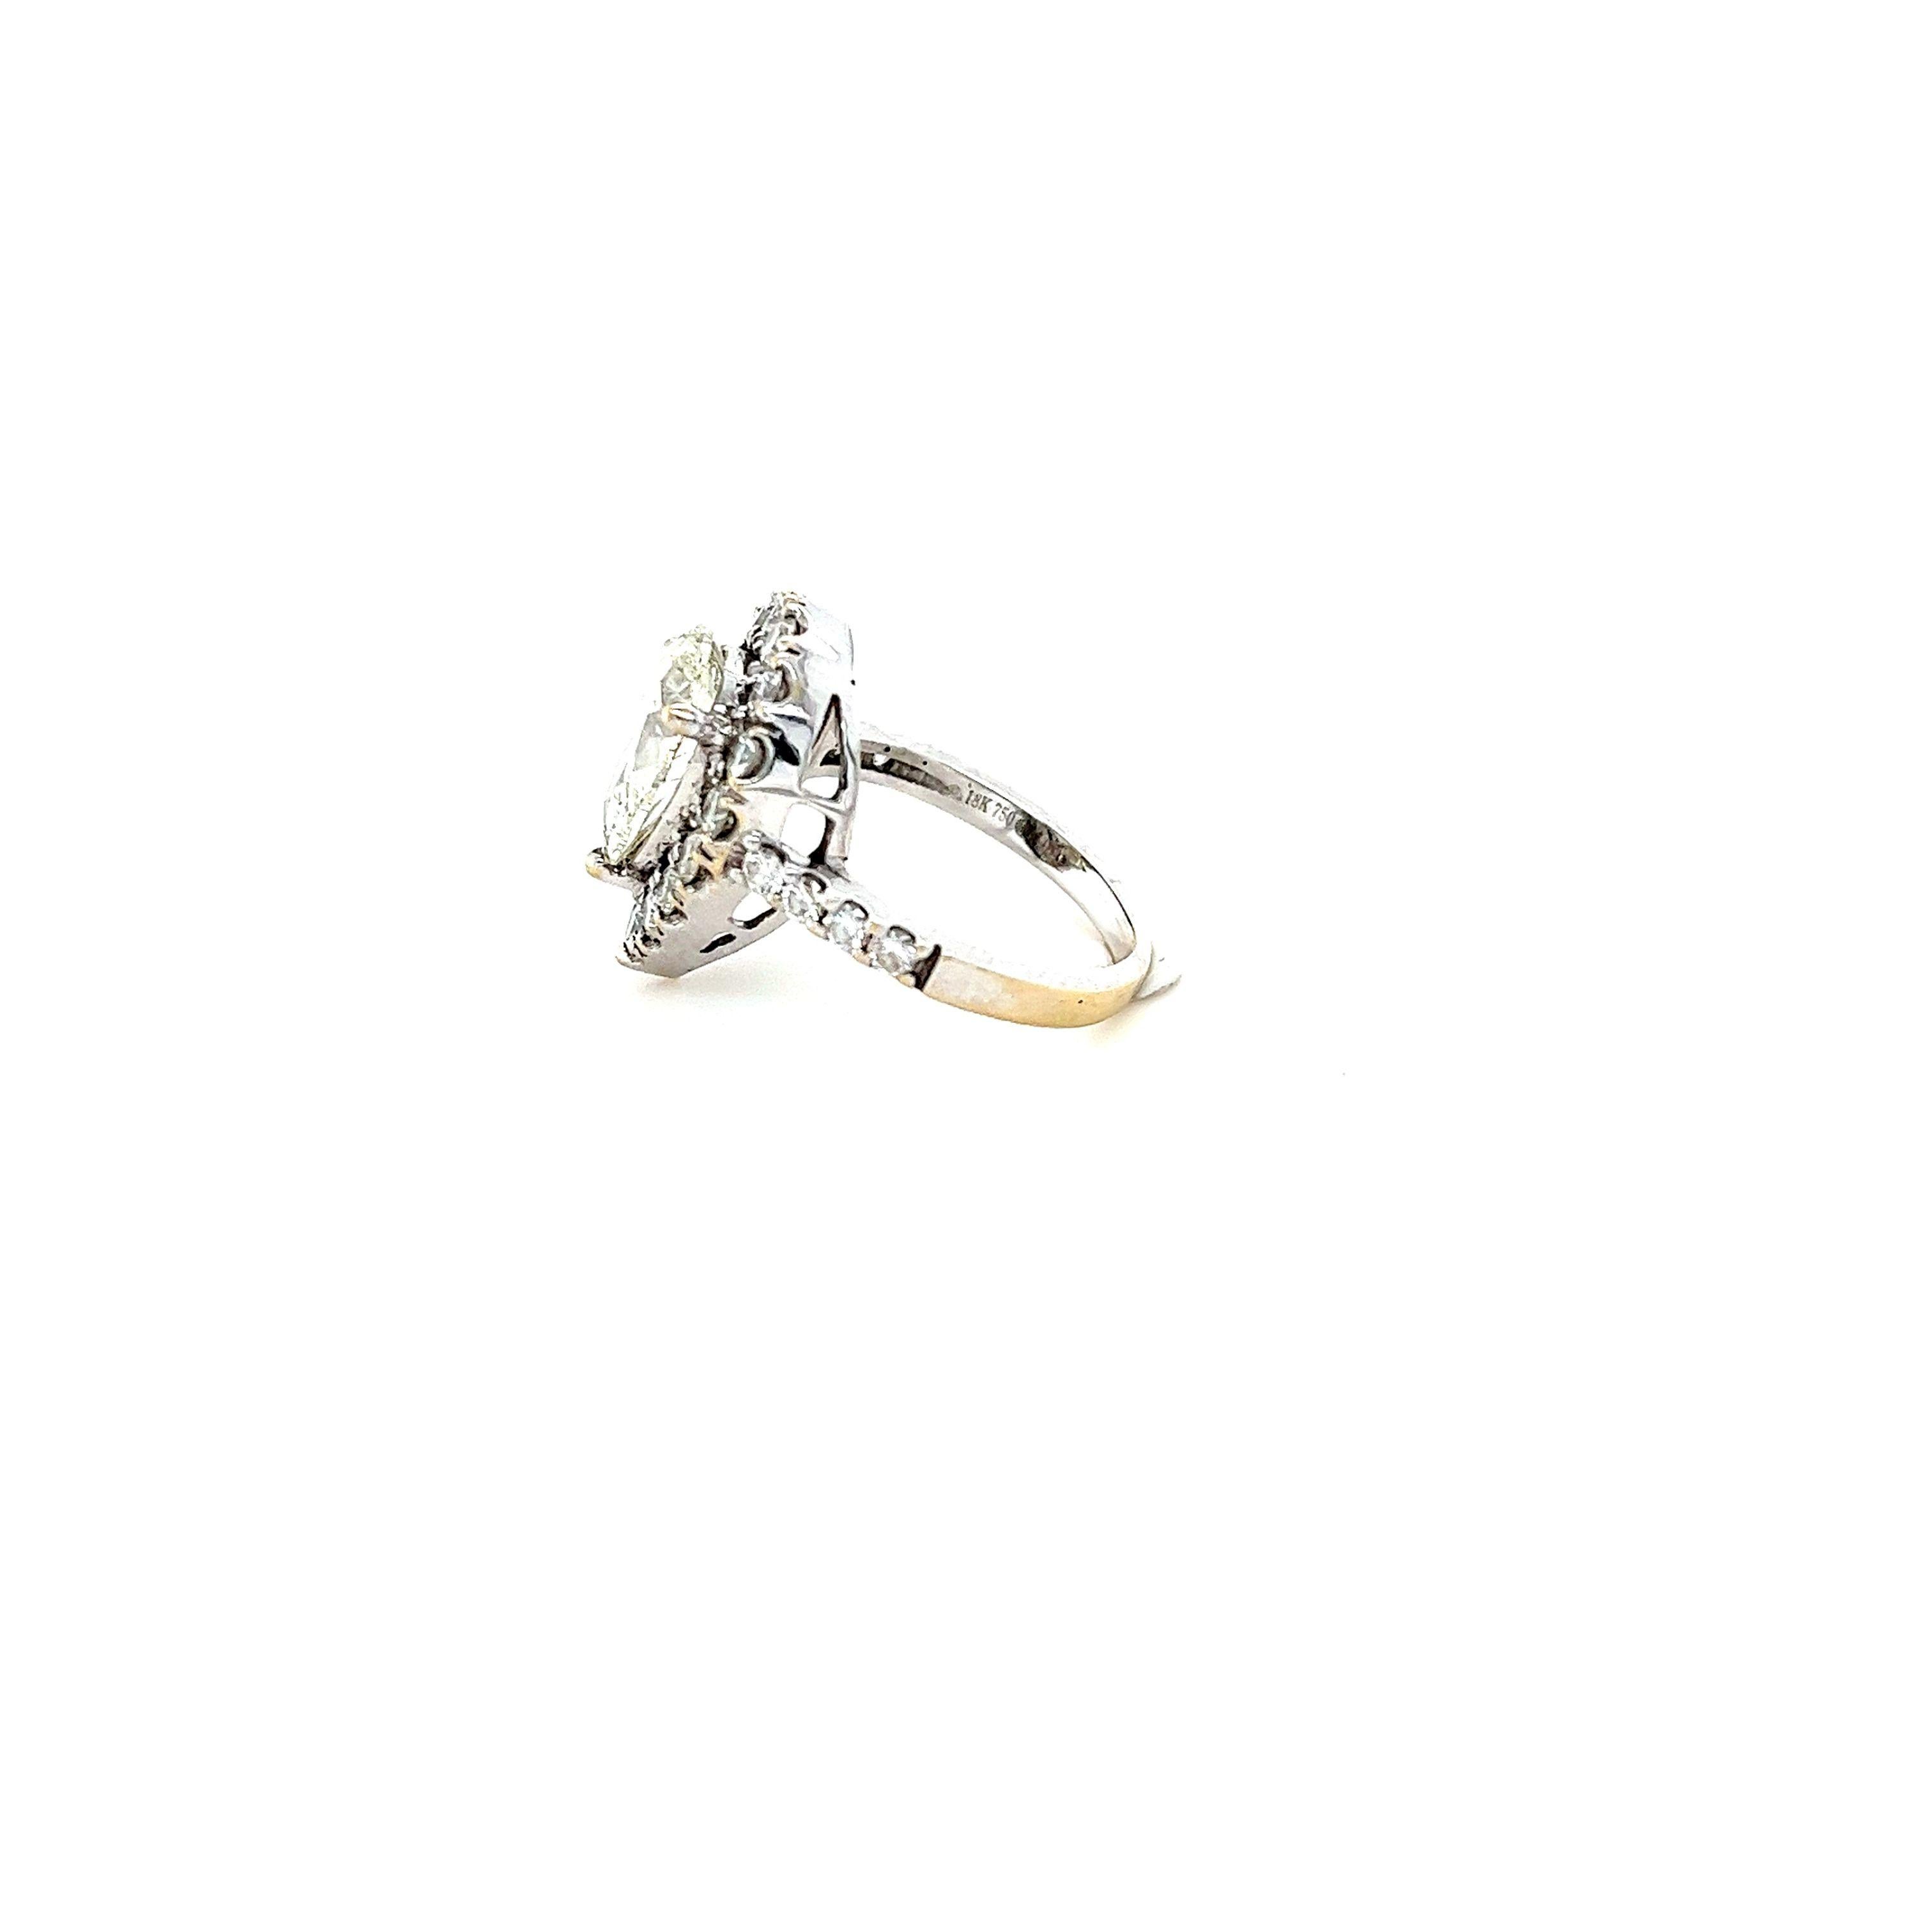 Bespoke Diamond Pear Cluster Ring 2.98ct For Sale 1